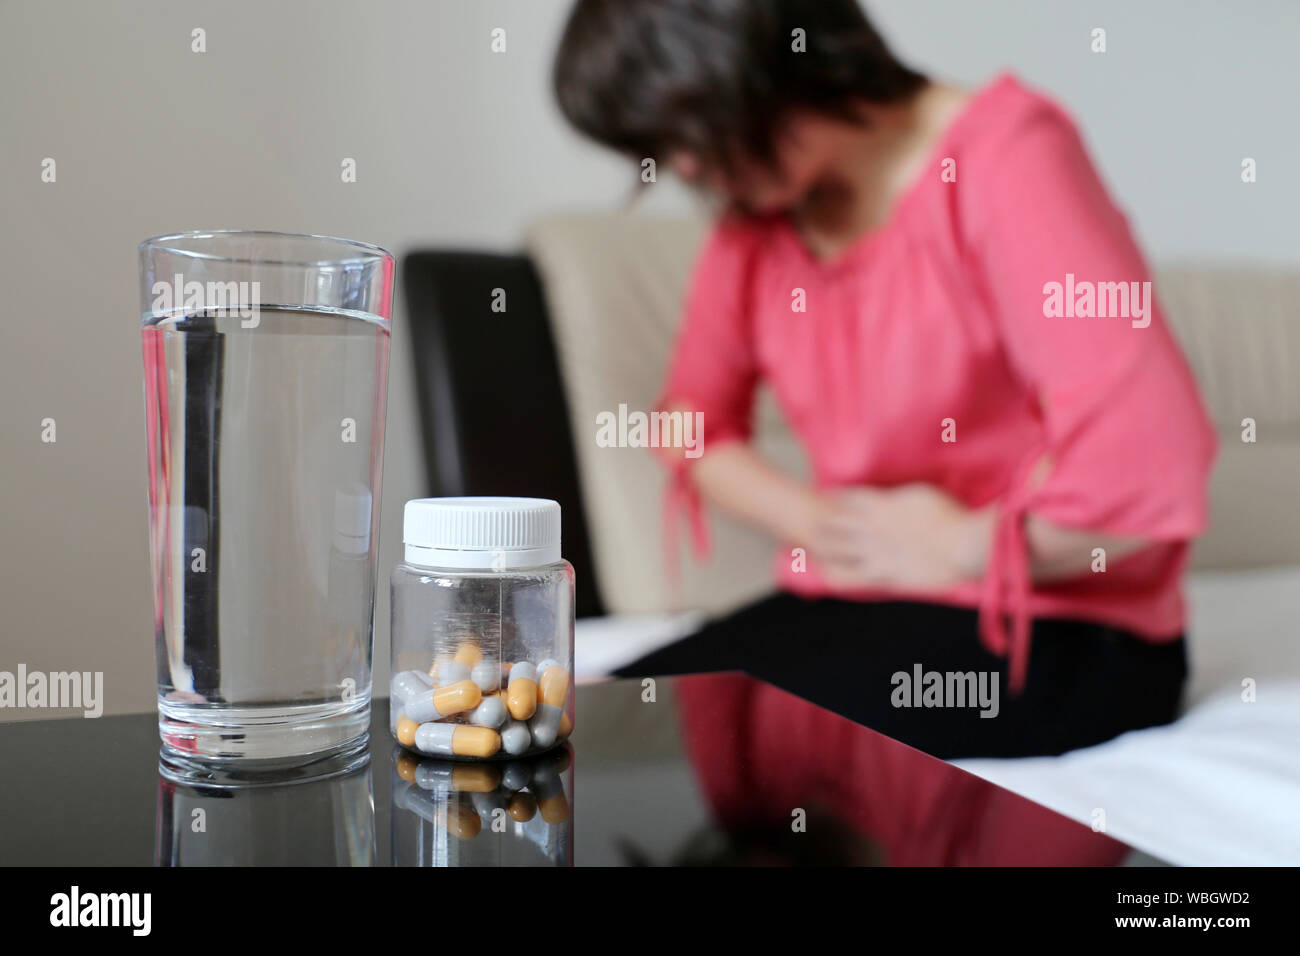 Stomach ache, bottle of pills and water glass on background of woman suffering from abdominal pain. Girl clutching her abdomen, menstruation concept Stock Photo